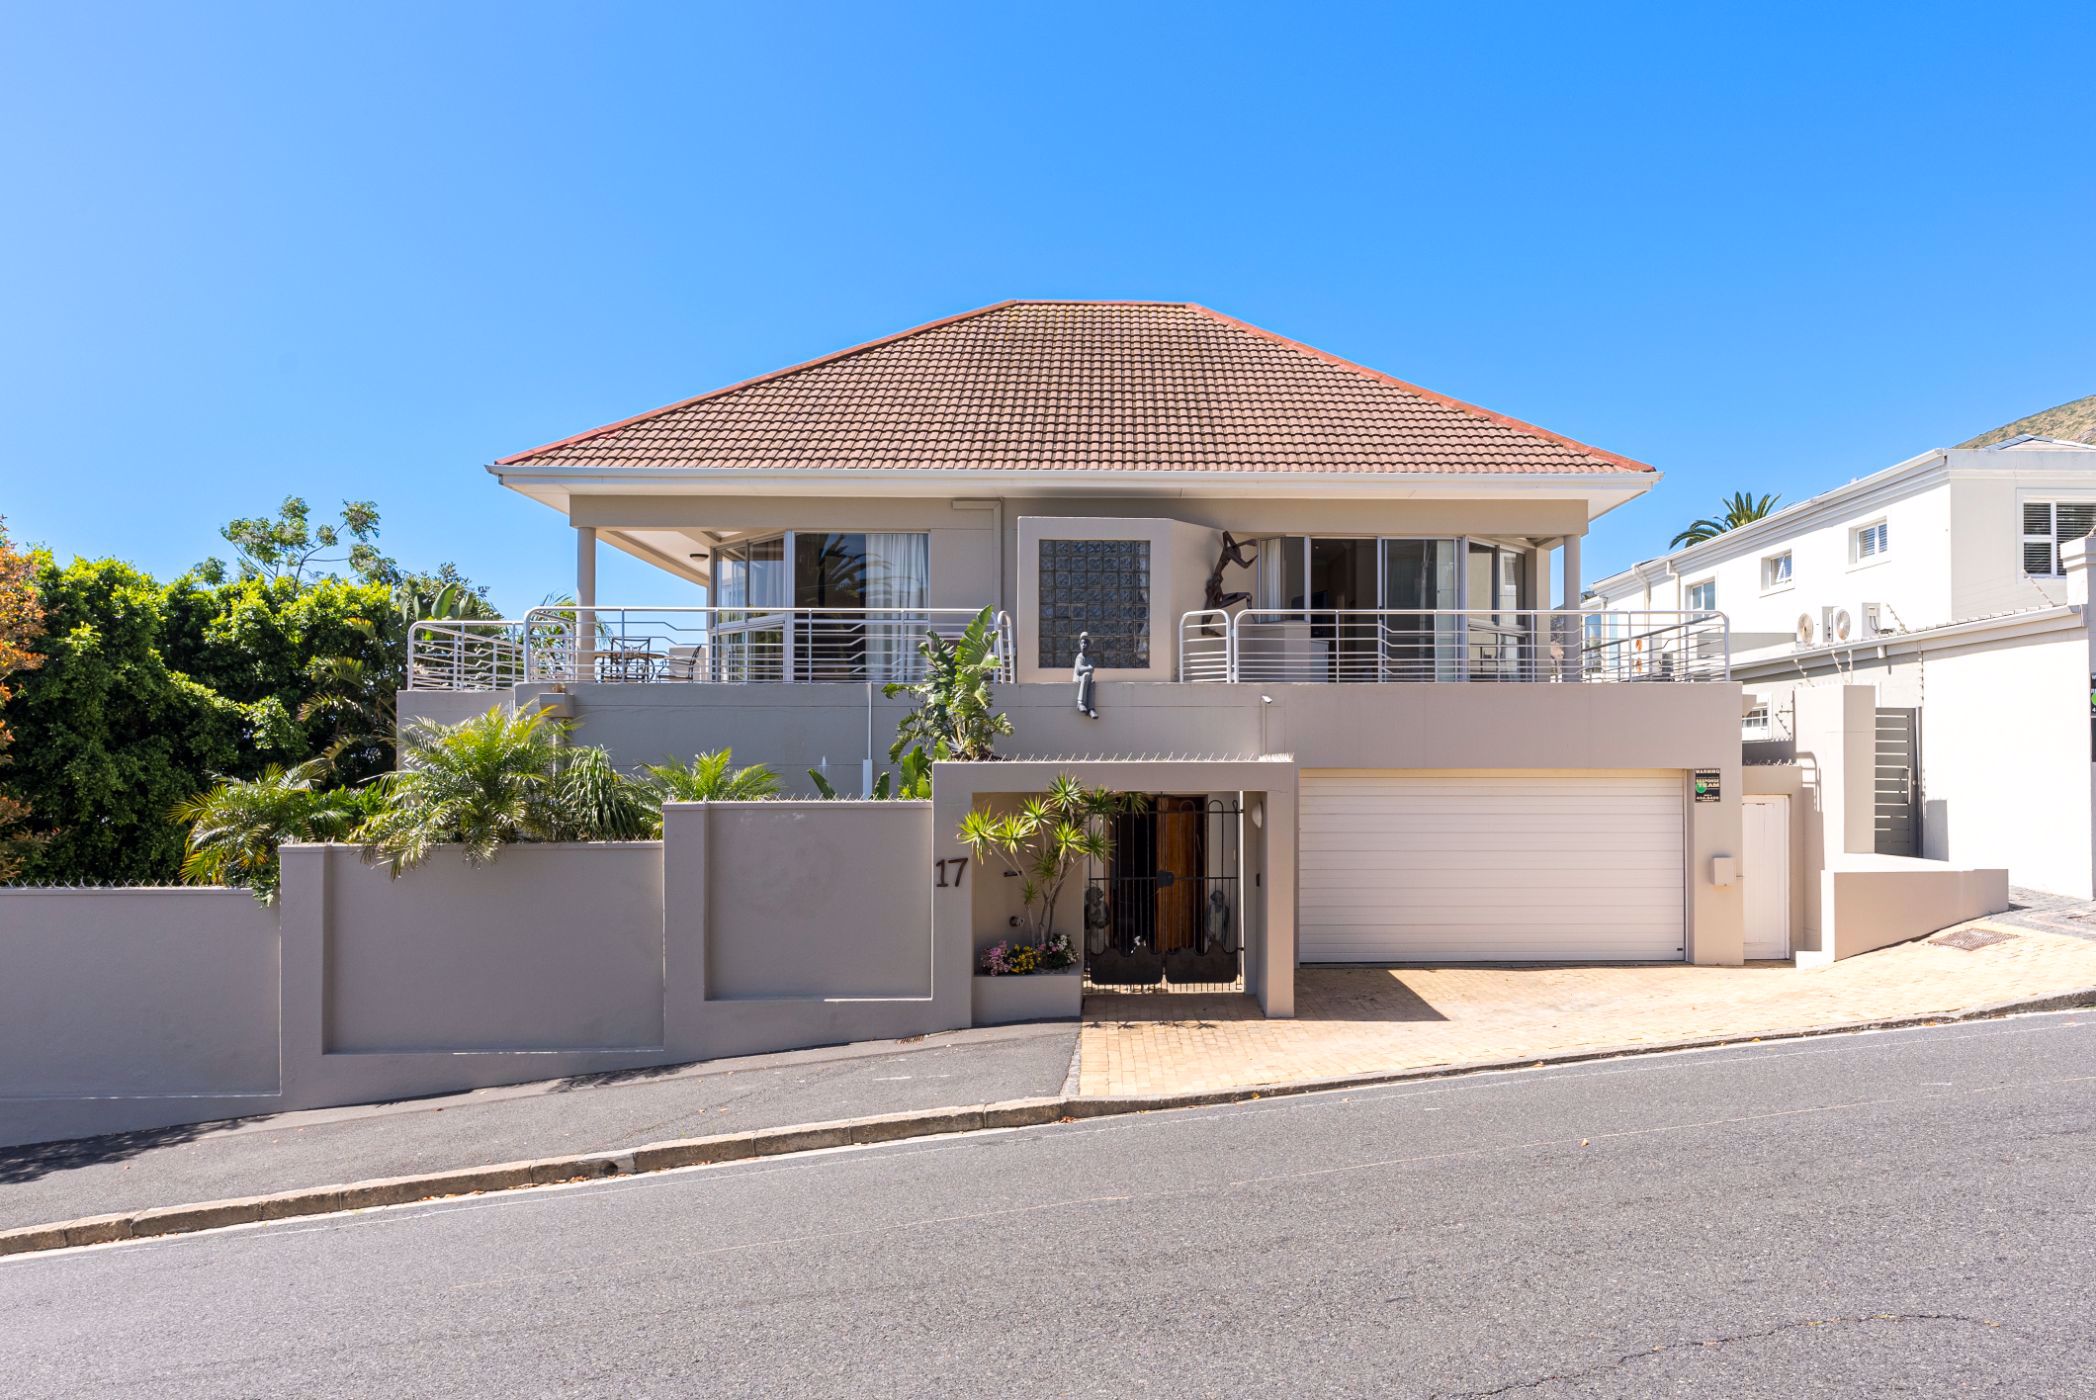 5 bedroom house for sale in Fresnaye